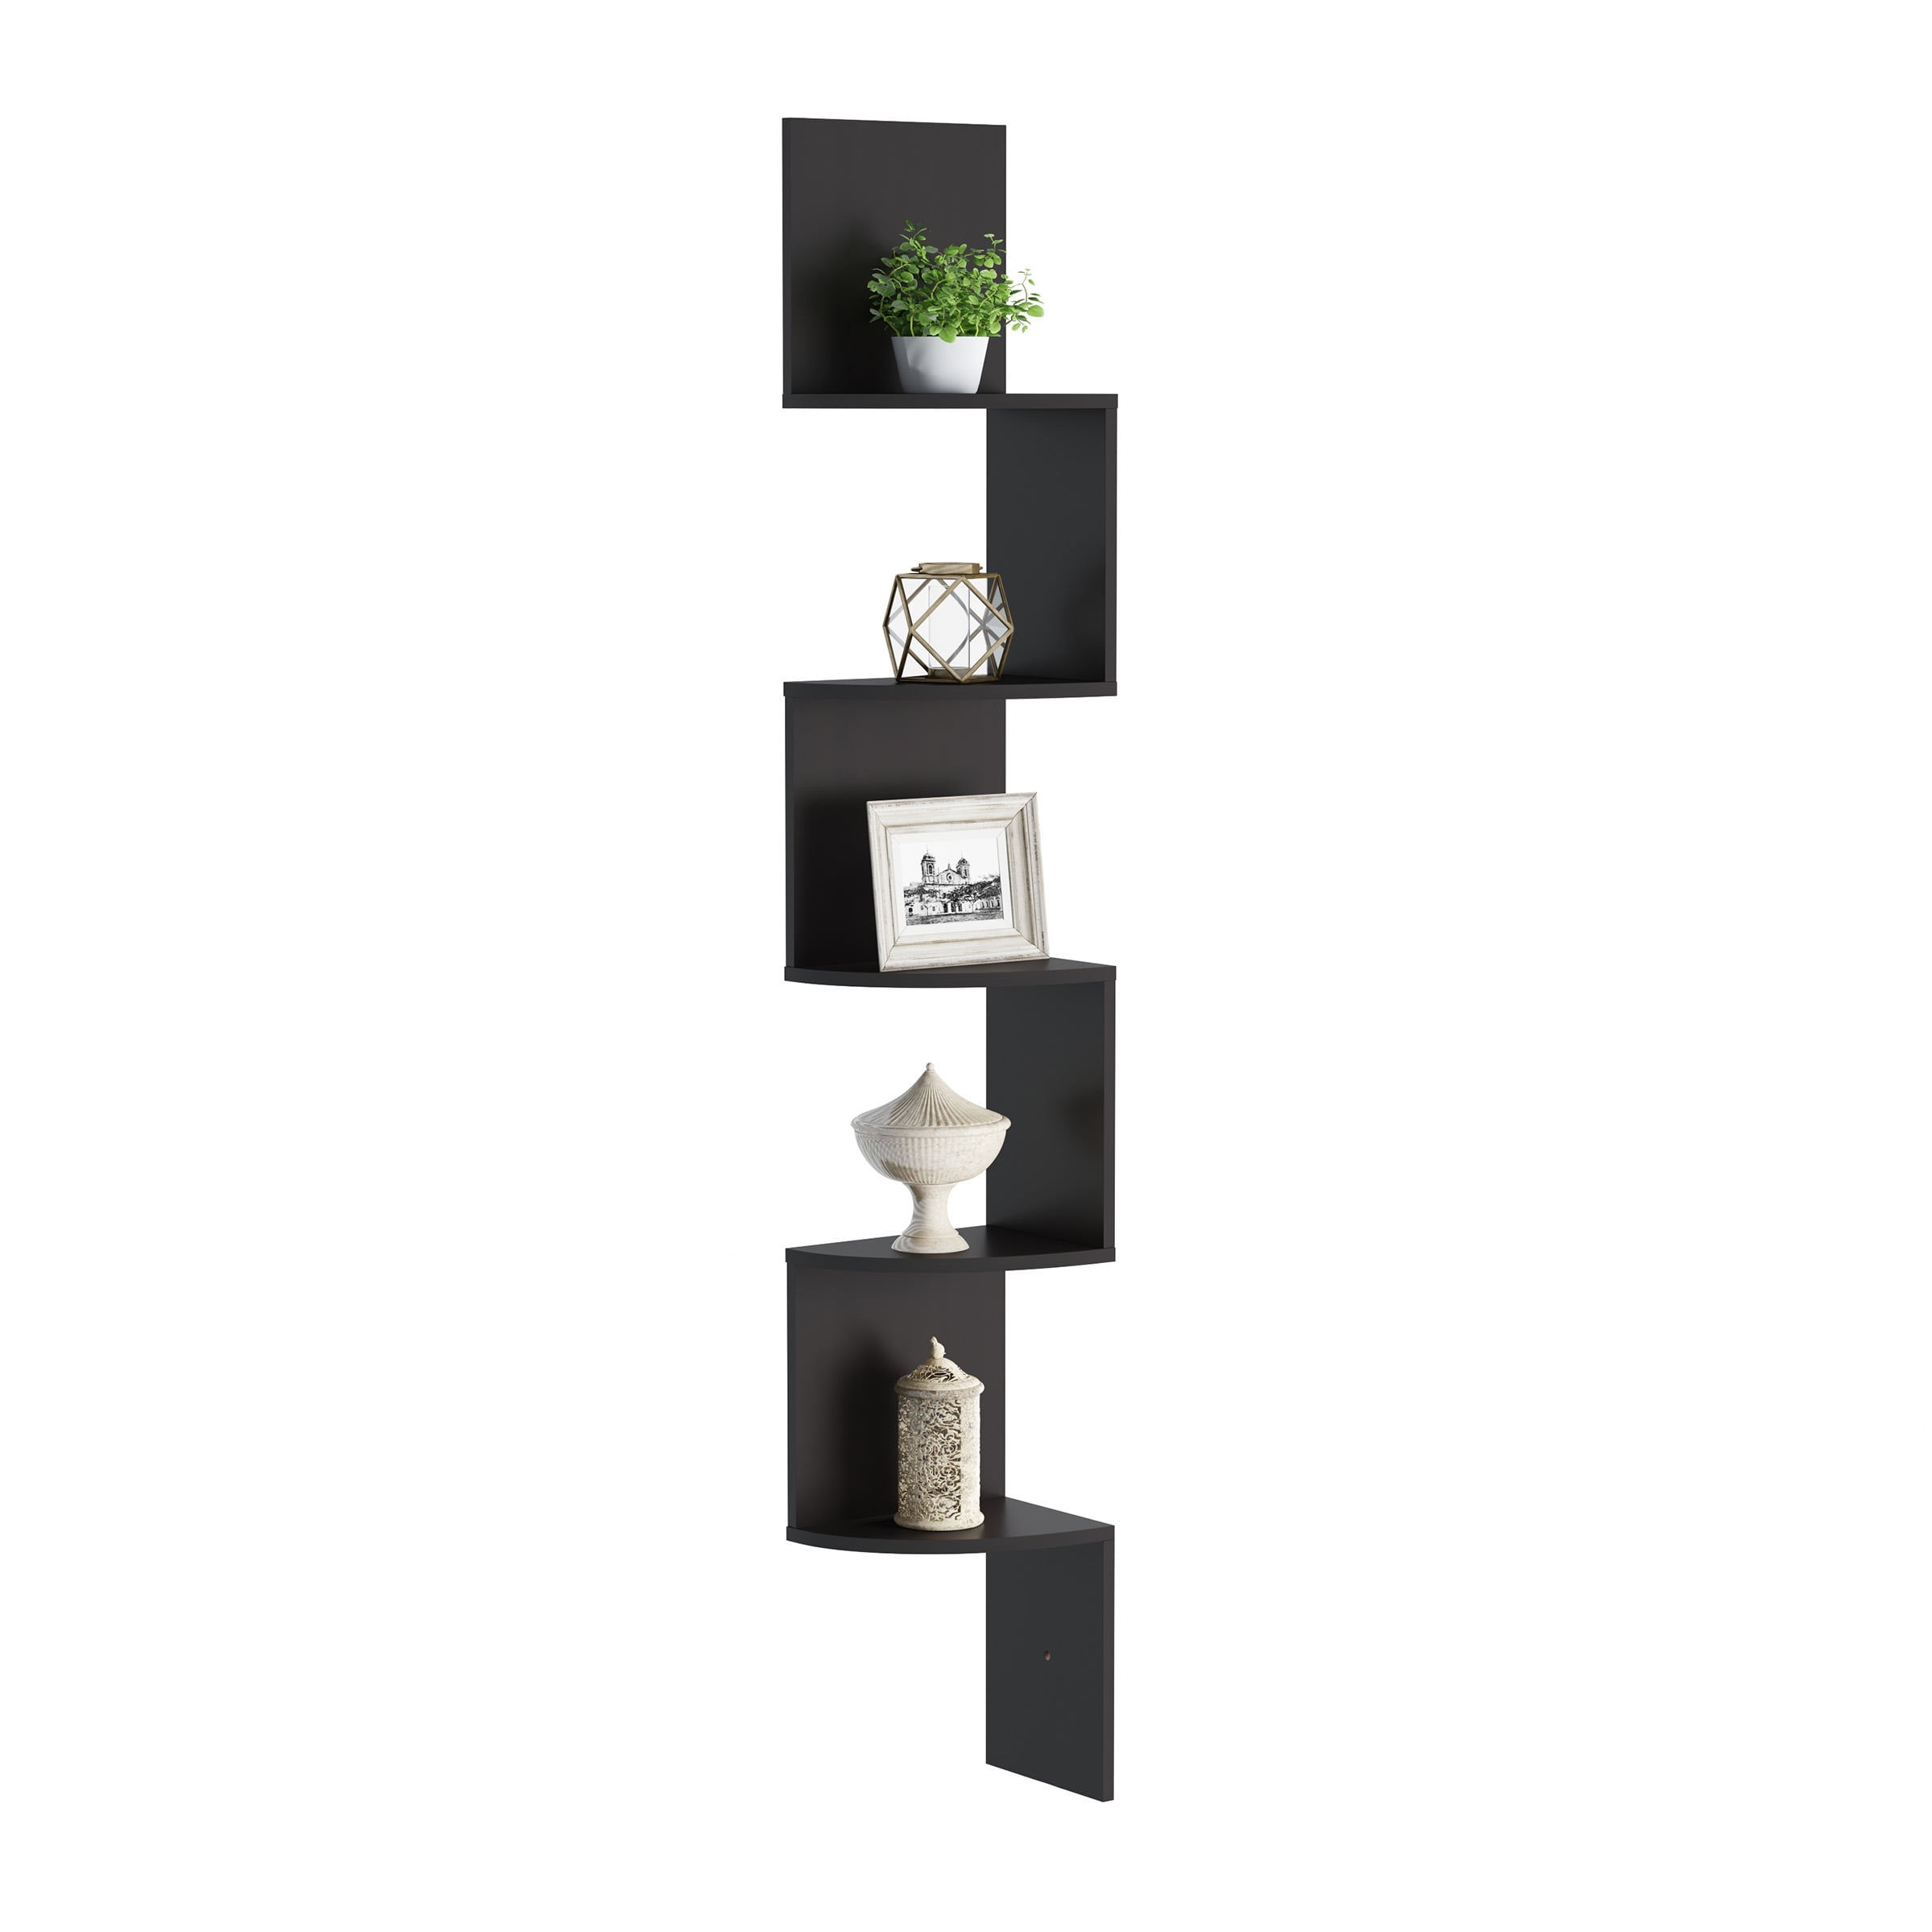 2/3/5 Tier Floating Corner Shelves Wall Unit Bookcase Book Storage Display Stand